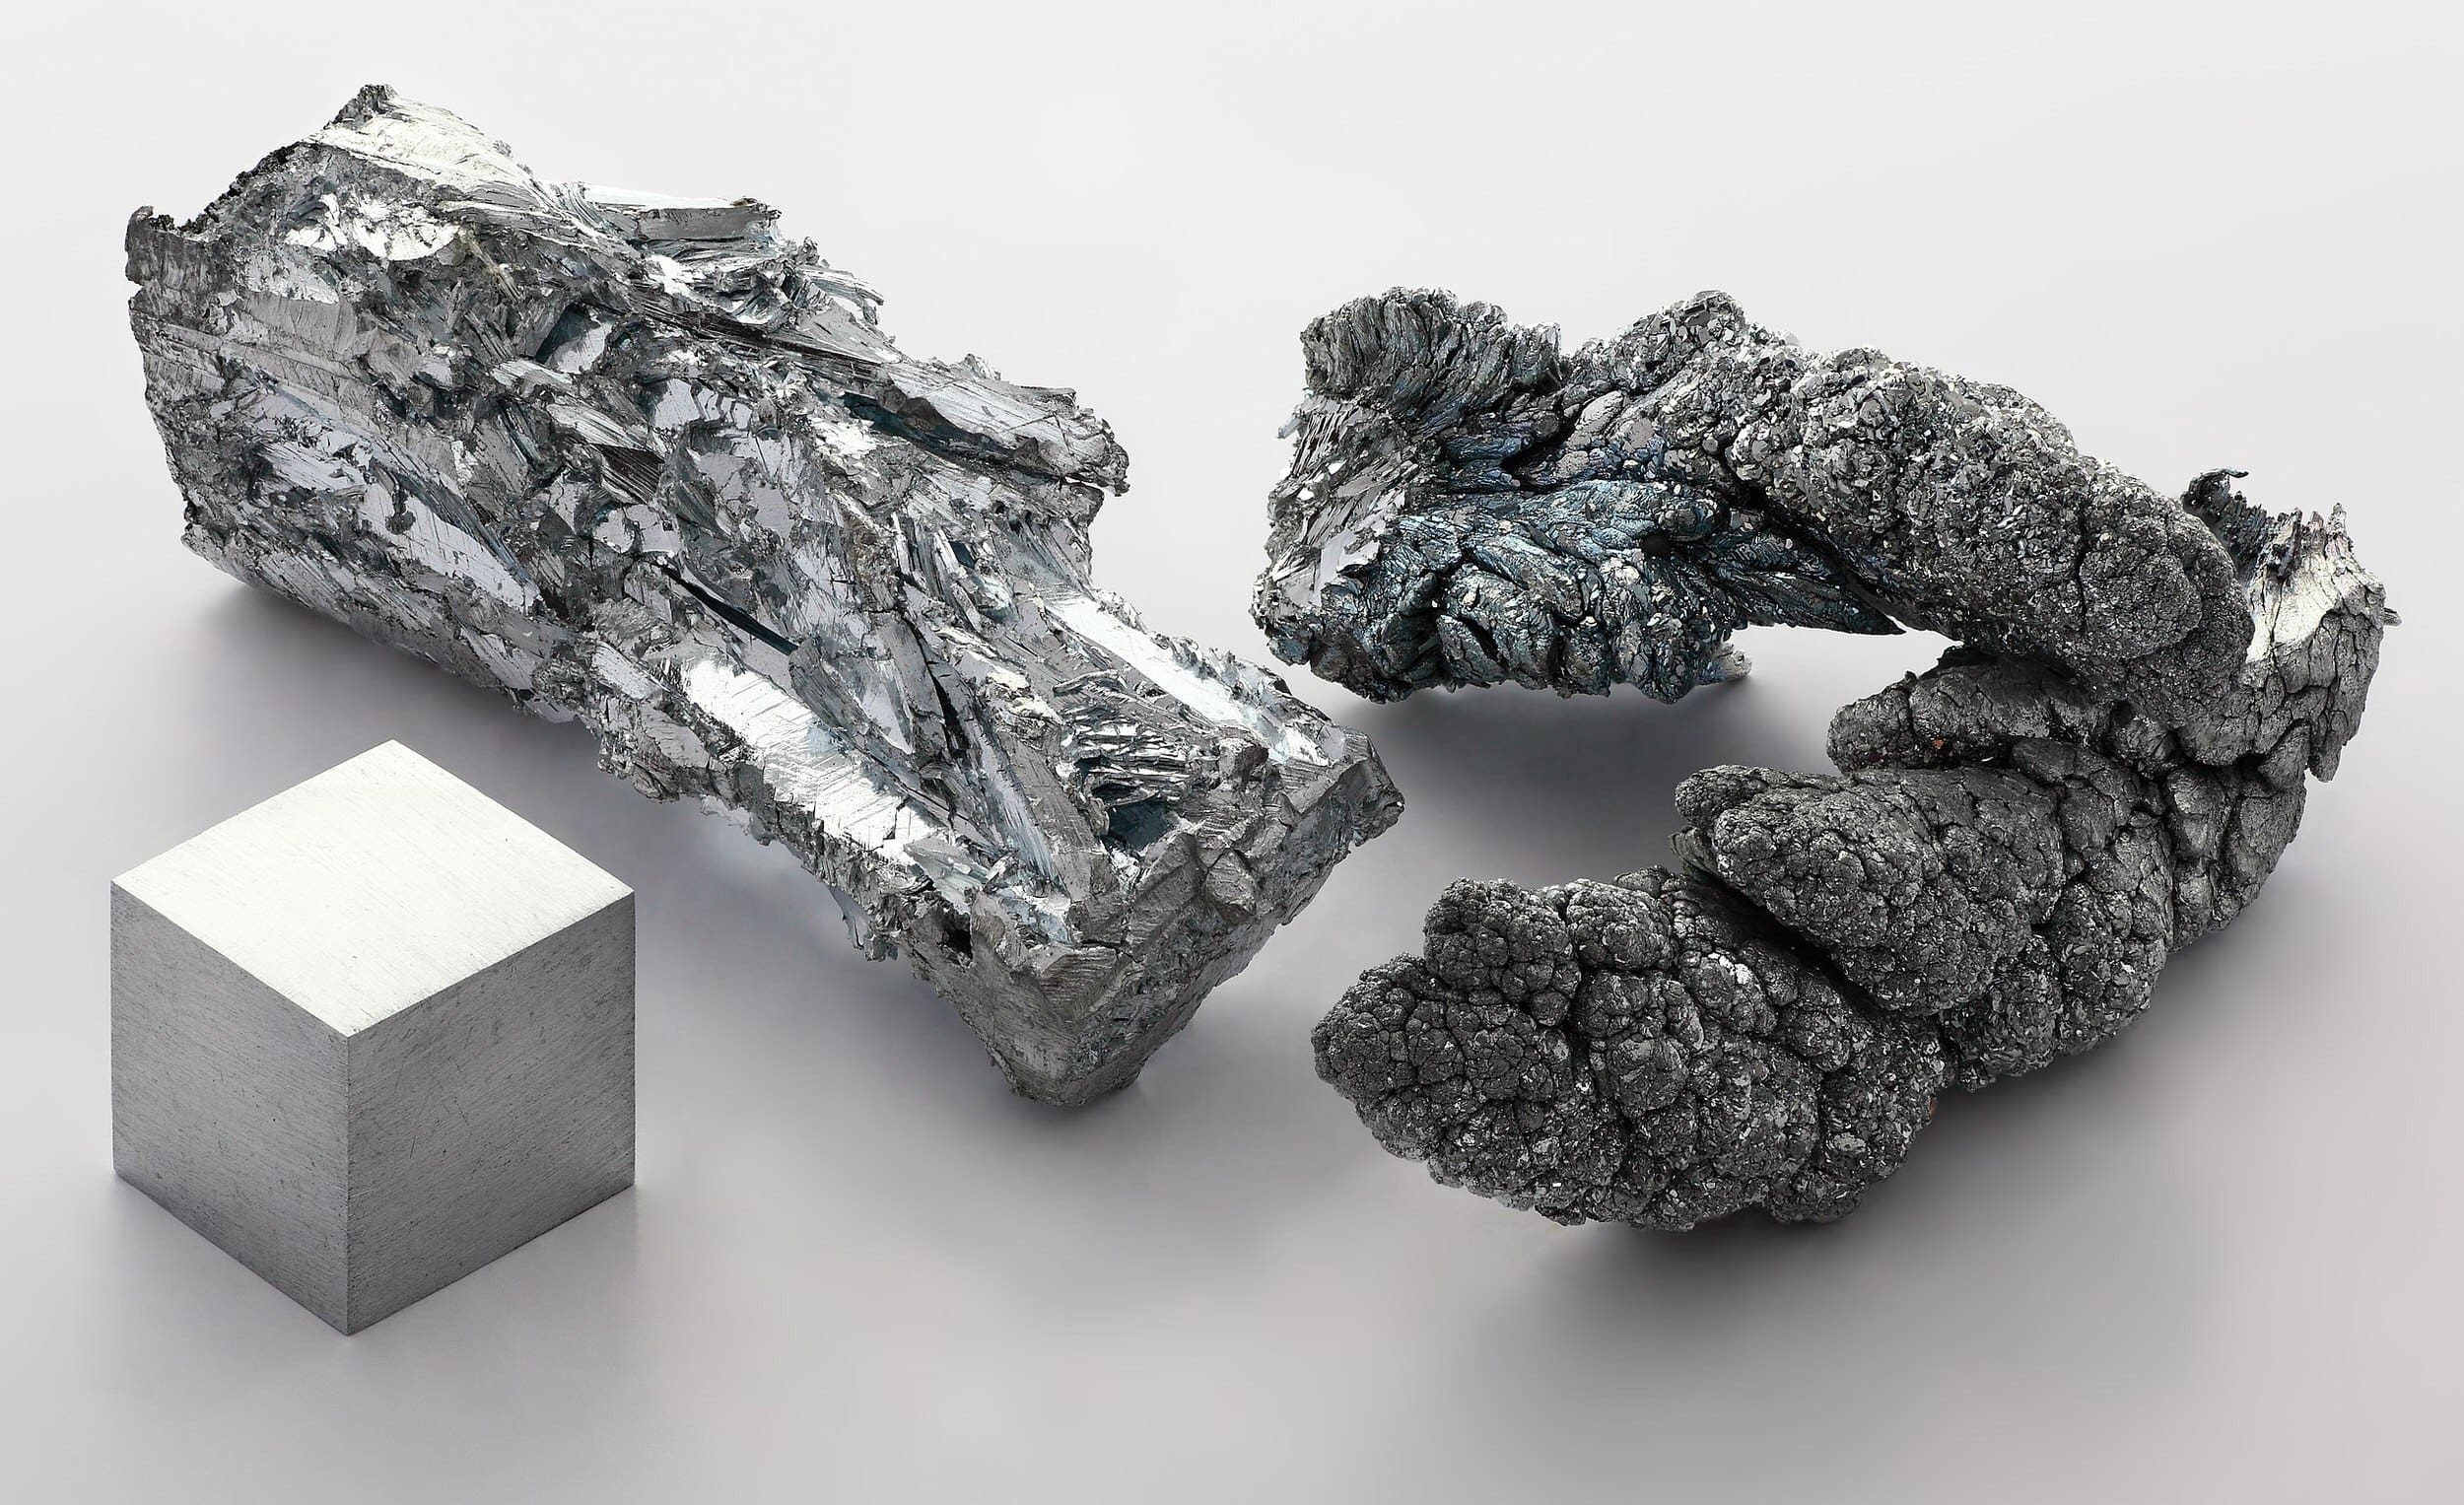 A 1 cubic centimeter, 99.995% pure zinc cube, a crystalline fragment of an ingot, and a sublimed dendrite.